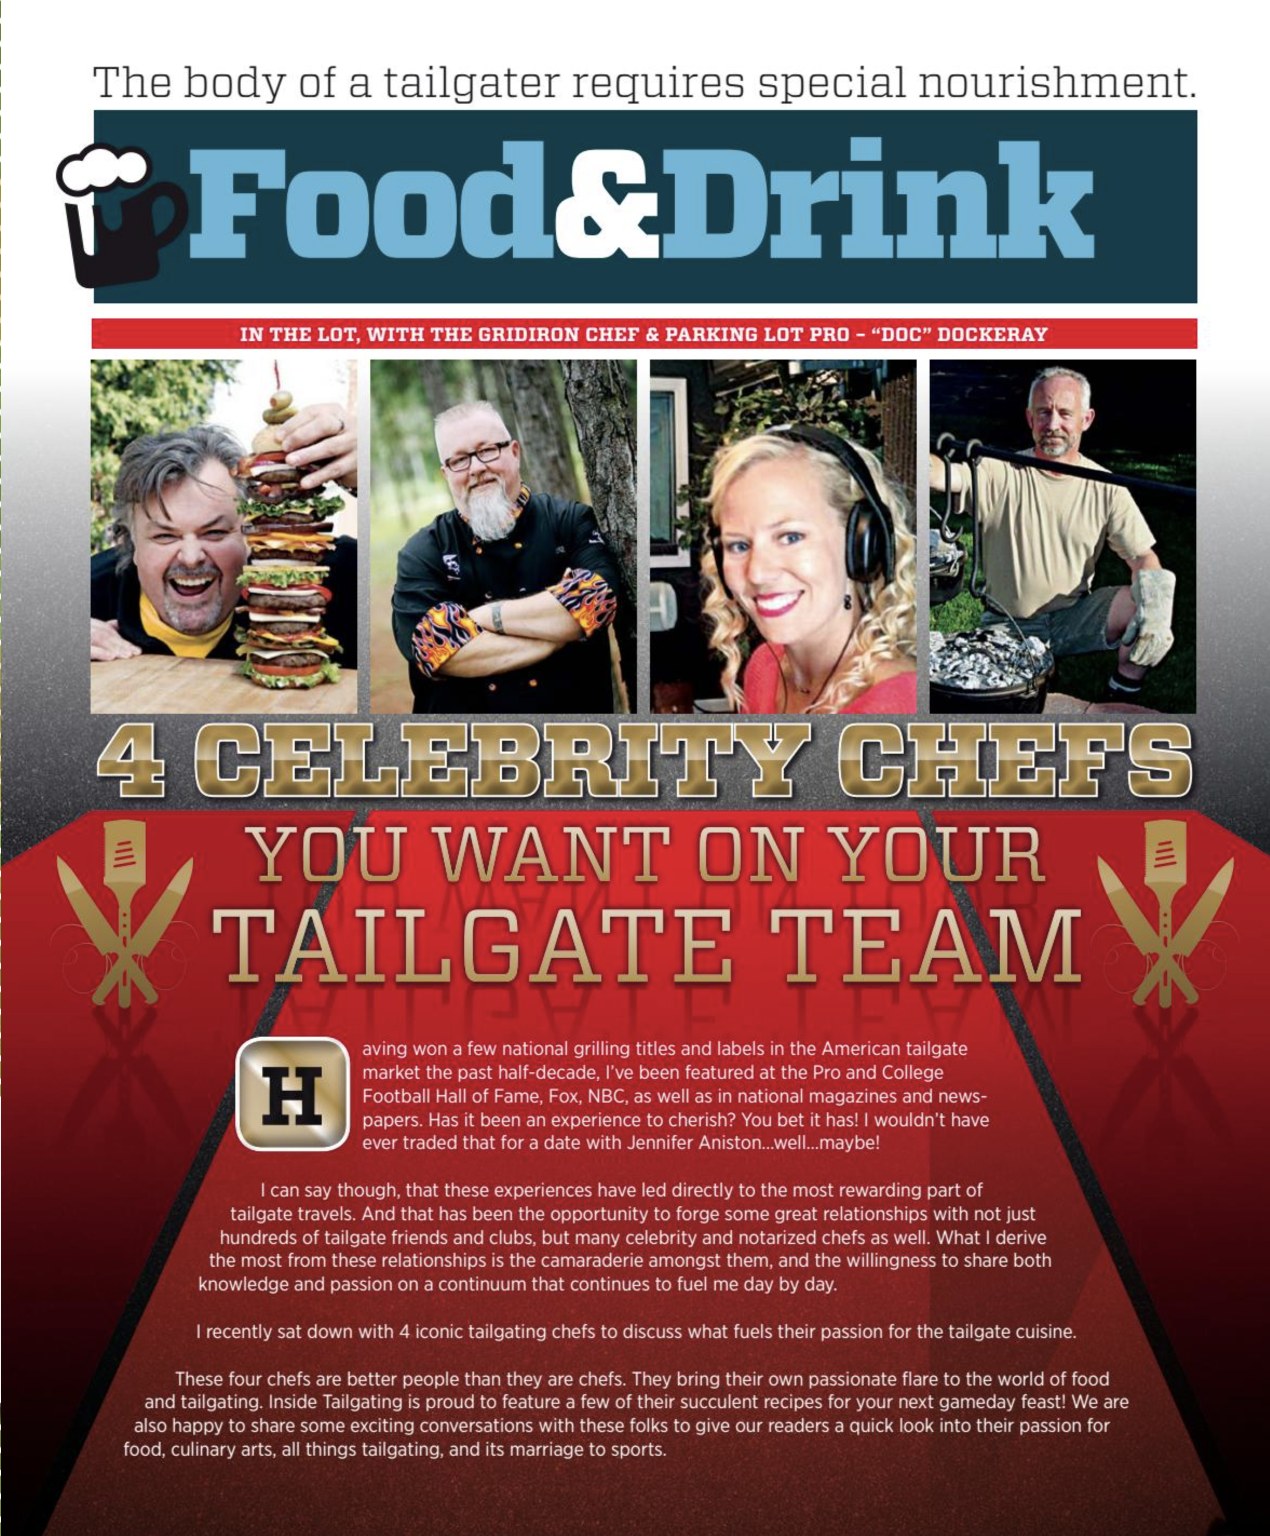 Pro Tailgating Tips and Recipes From 4 Grill Masters